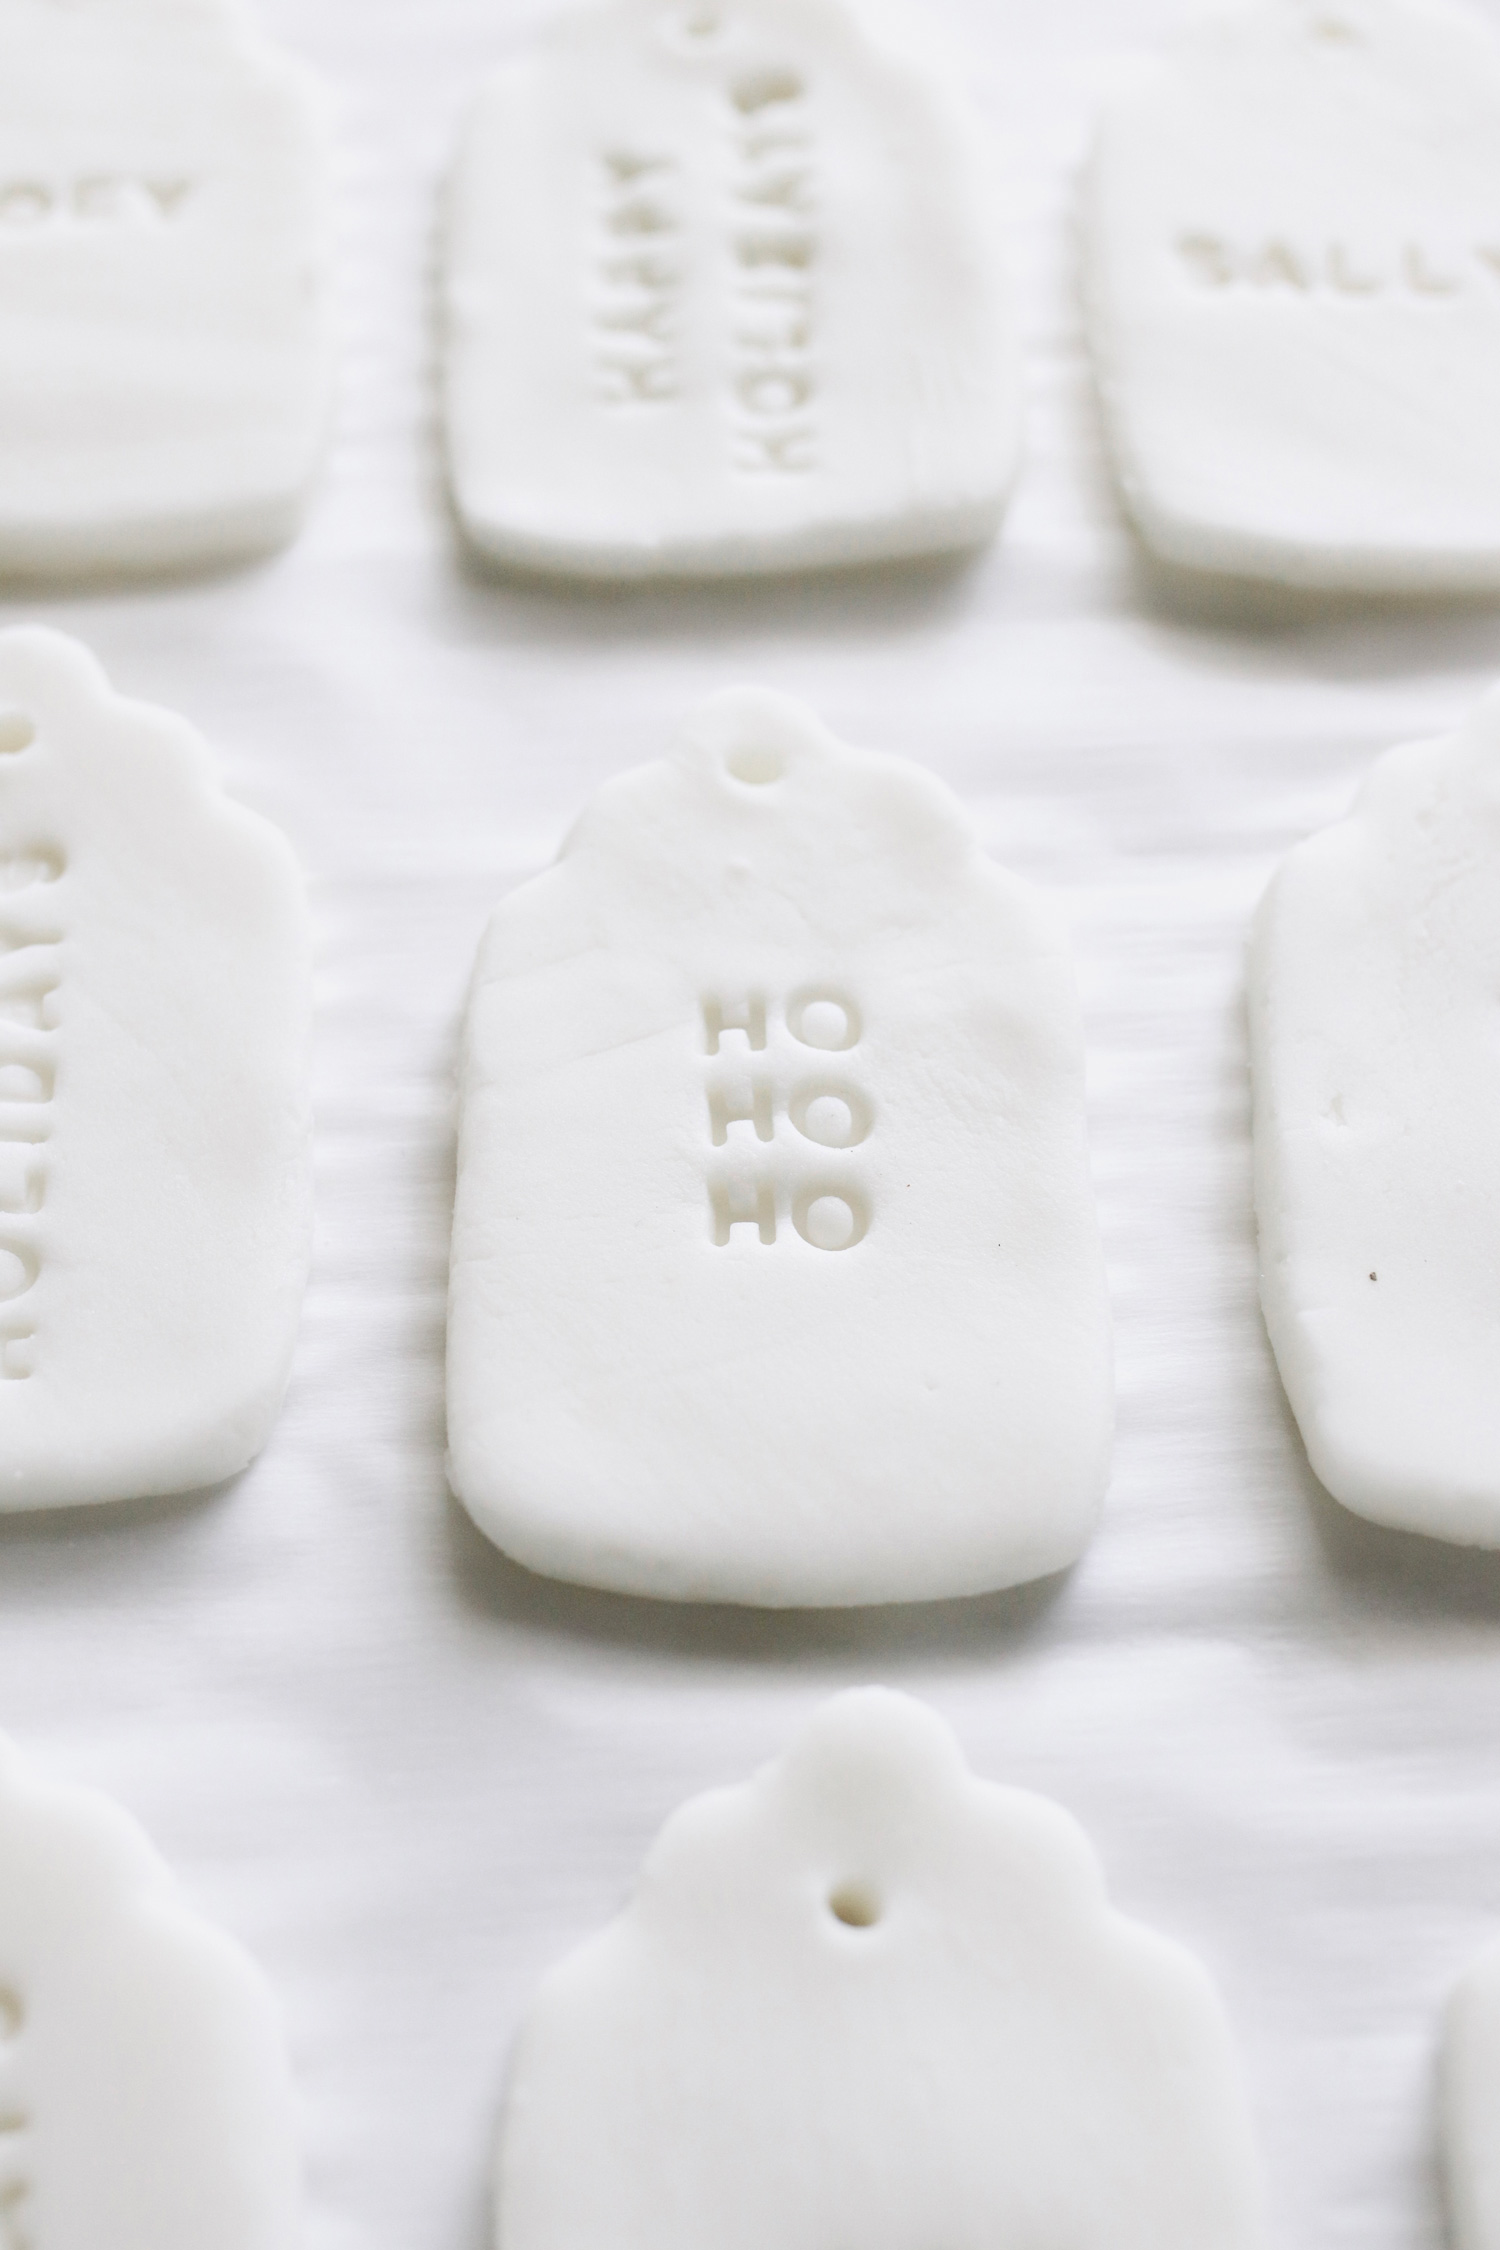 ake your own reusable DIY gift tags with 3-ingredient cornstarch clay and a cookie cutter, and never worry about running out of gift tags again.